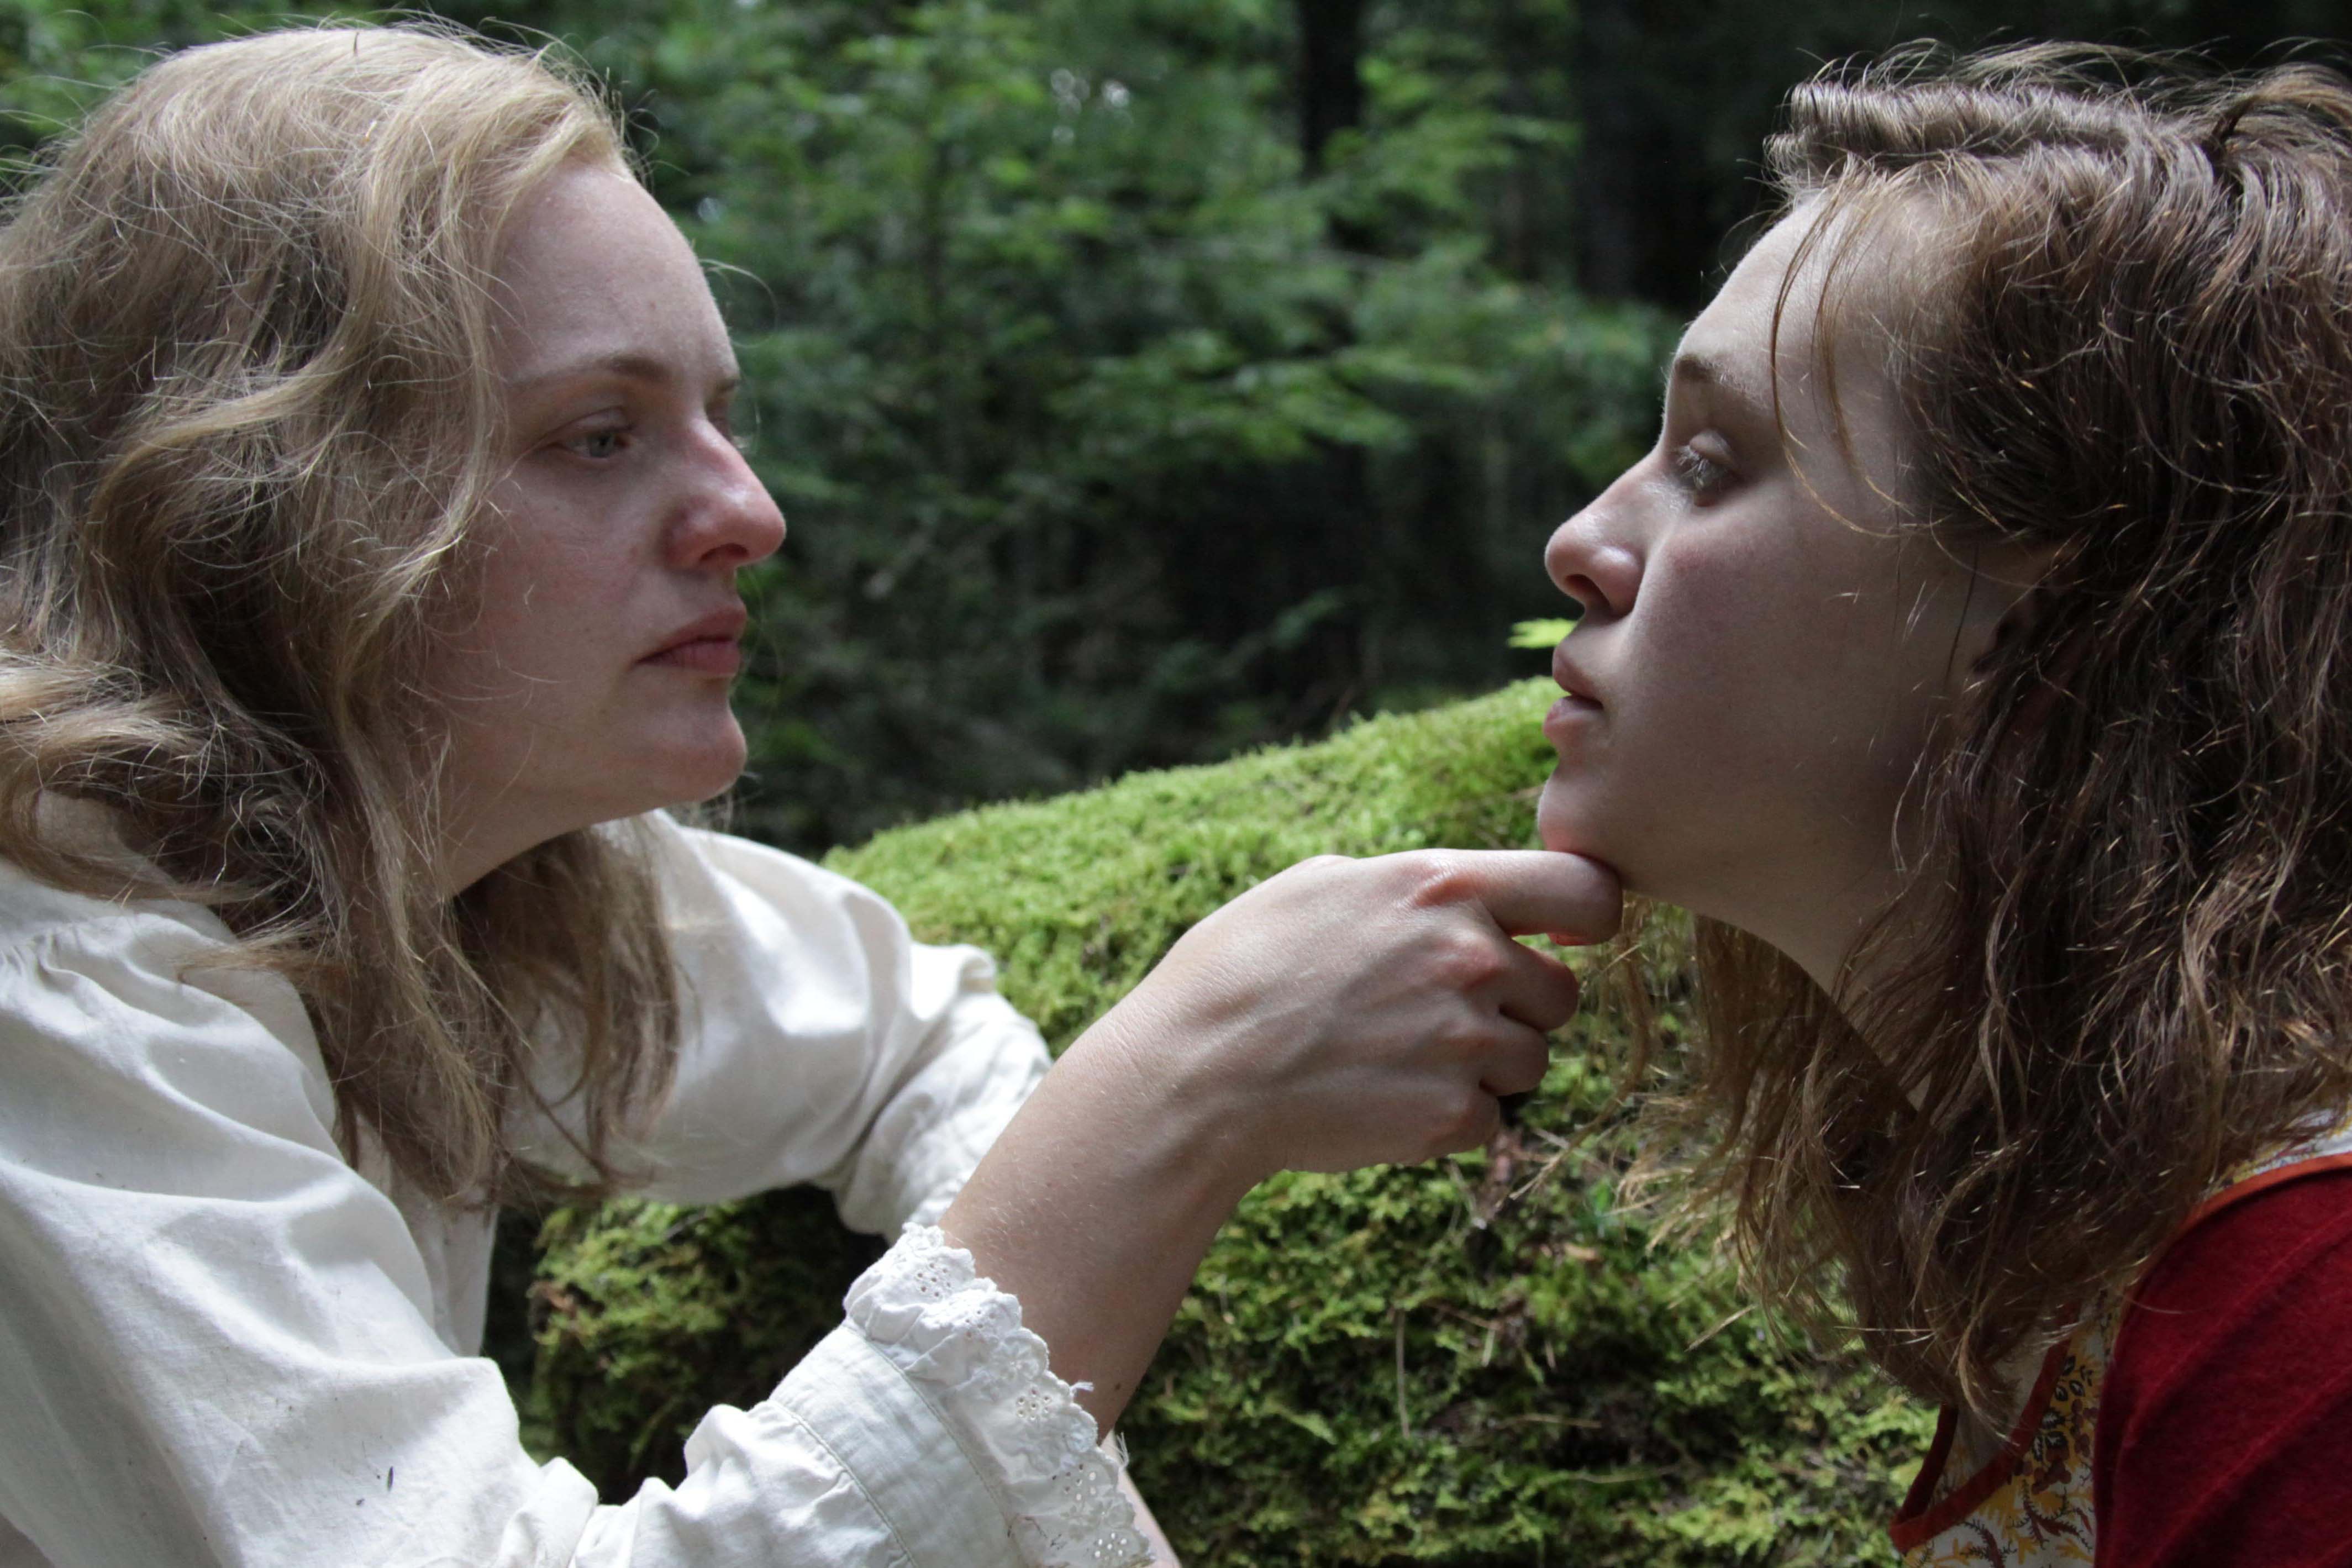 A still from Shirley, starring Elisabeth Moss as Shirley (left) and Odessa Young as Rose